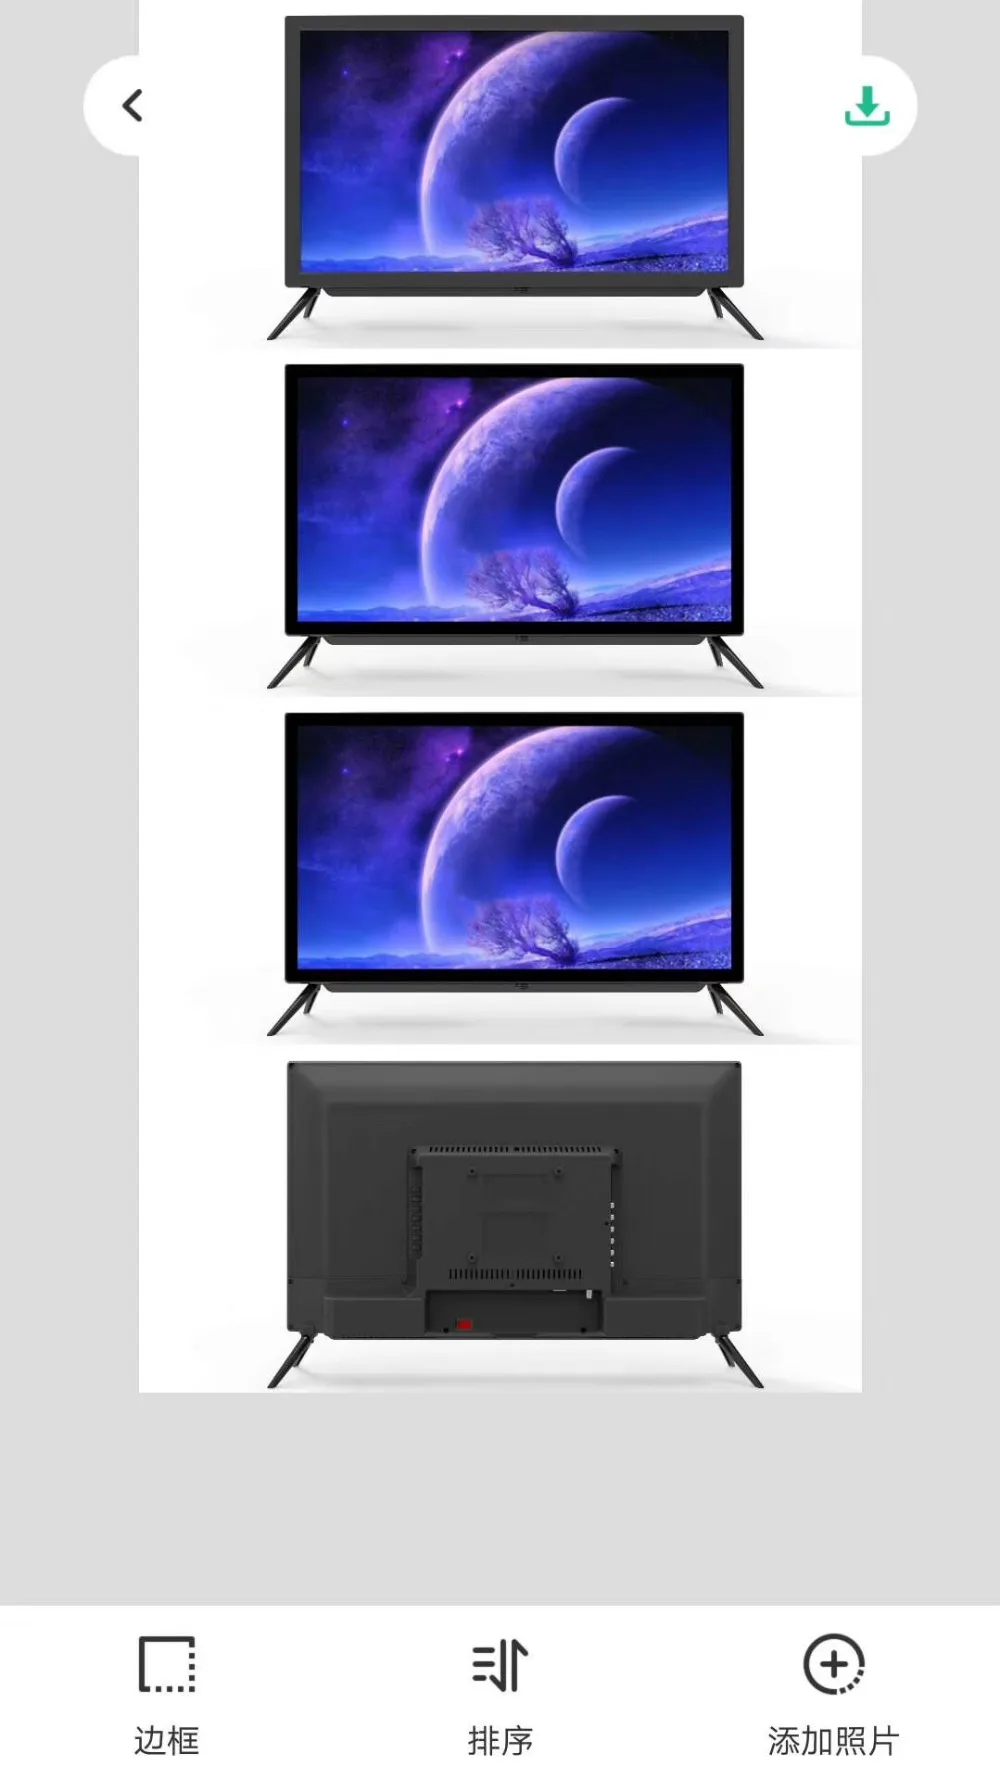 Hot-selling led smart 17 inch 4:3 android smart led TV television